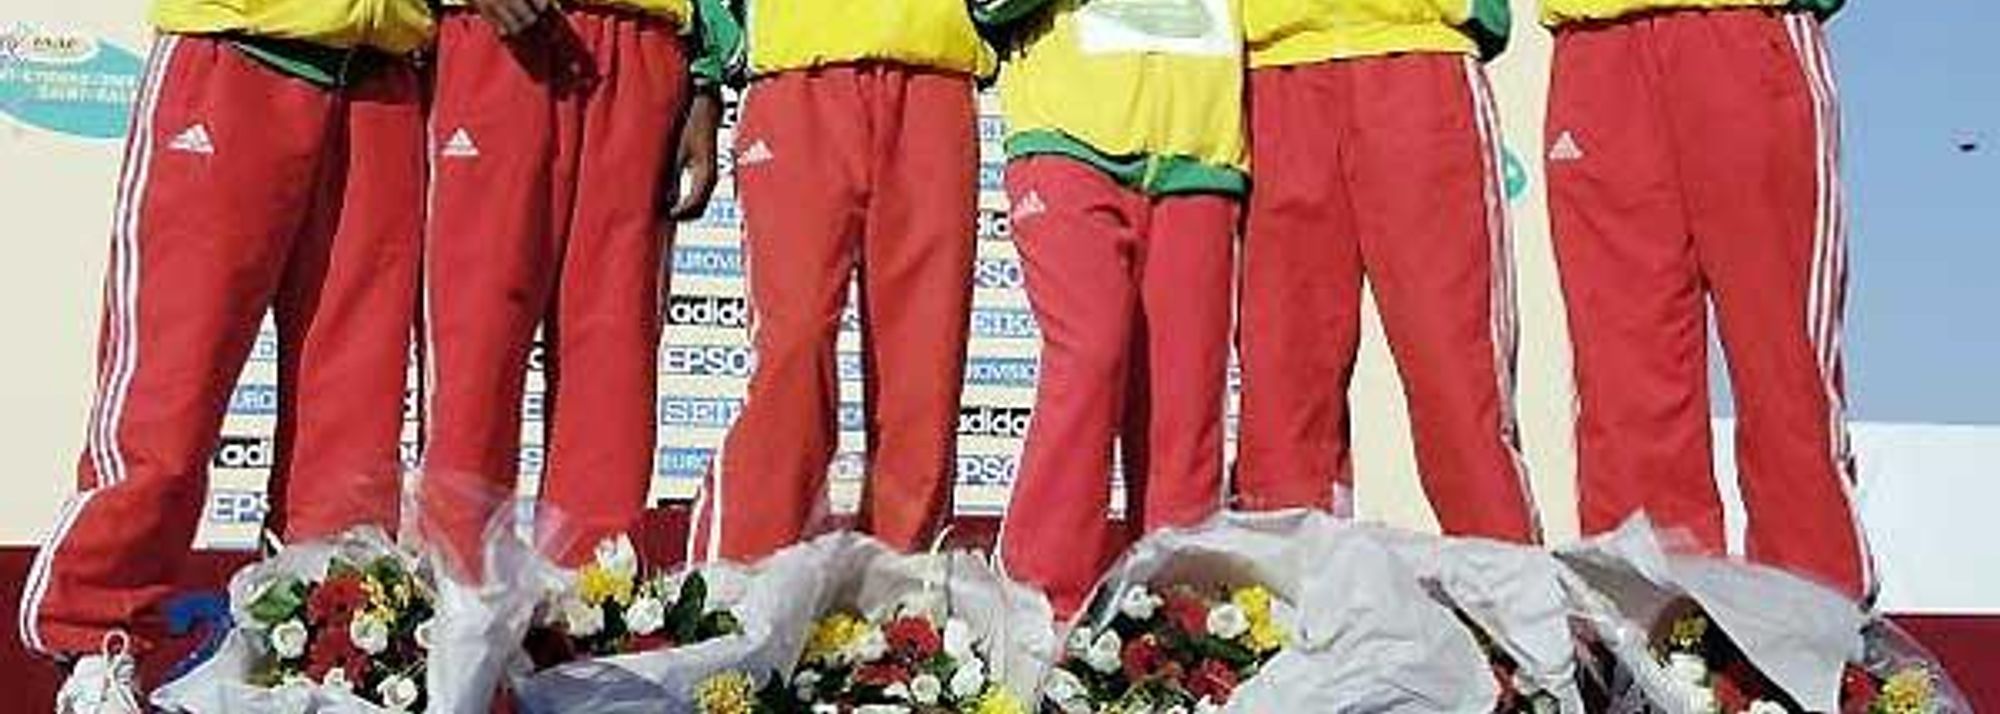 Hours after Kenenisa Bekele and Tirunesh Dibaba completed their short and long course doubles at last weekend’s 33rd IAAF World Cross Country Championships in St-Etienne/St-Galmier (19/20 March), the Ethiopian athletics team was already celebrating its haul of nine medals from a good weekend’s work in central France.